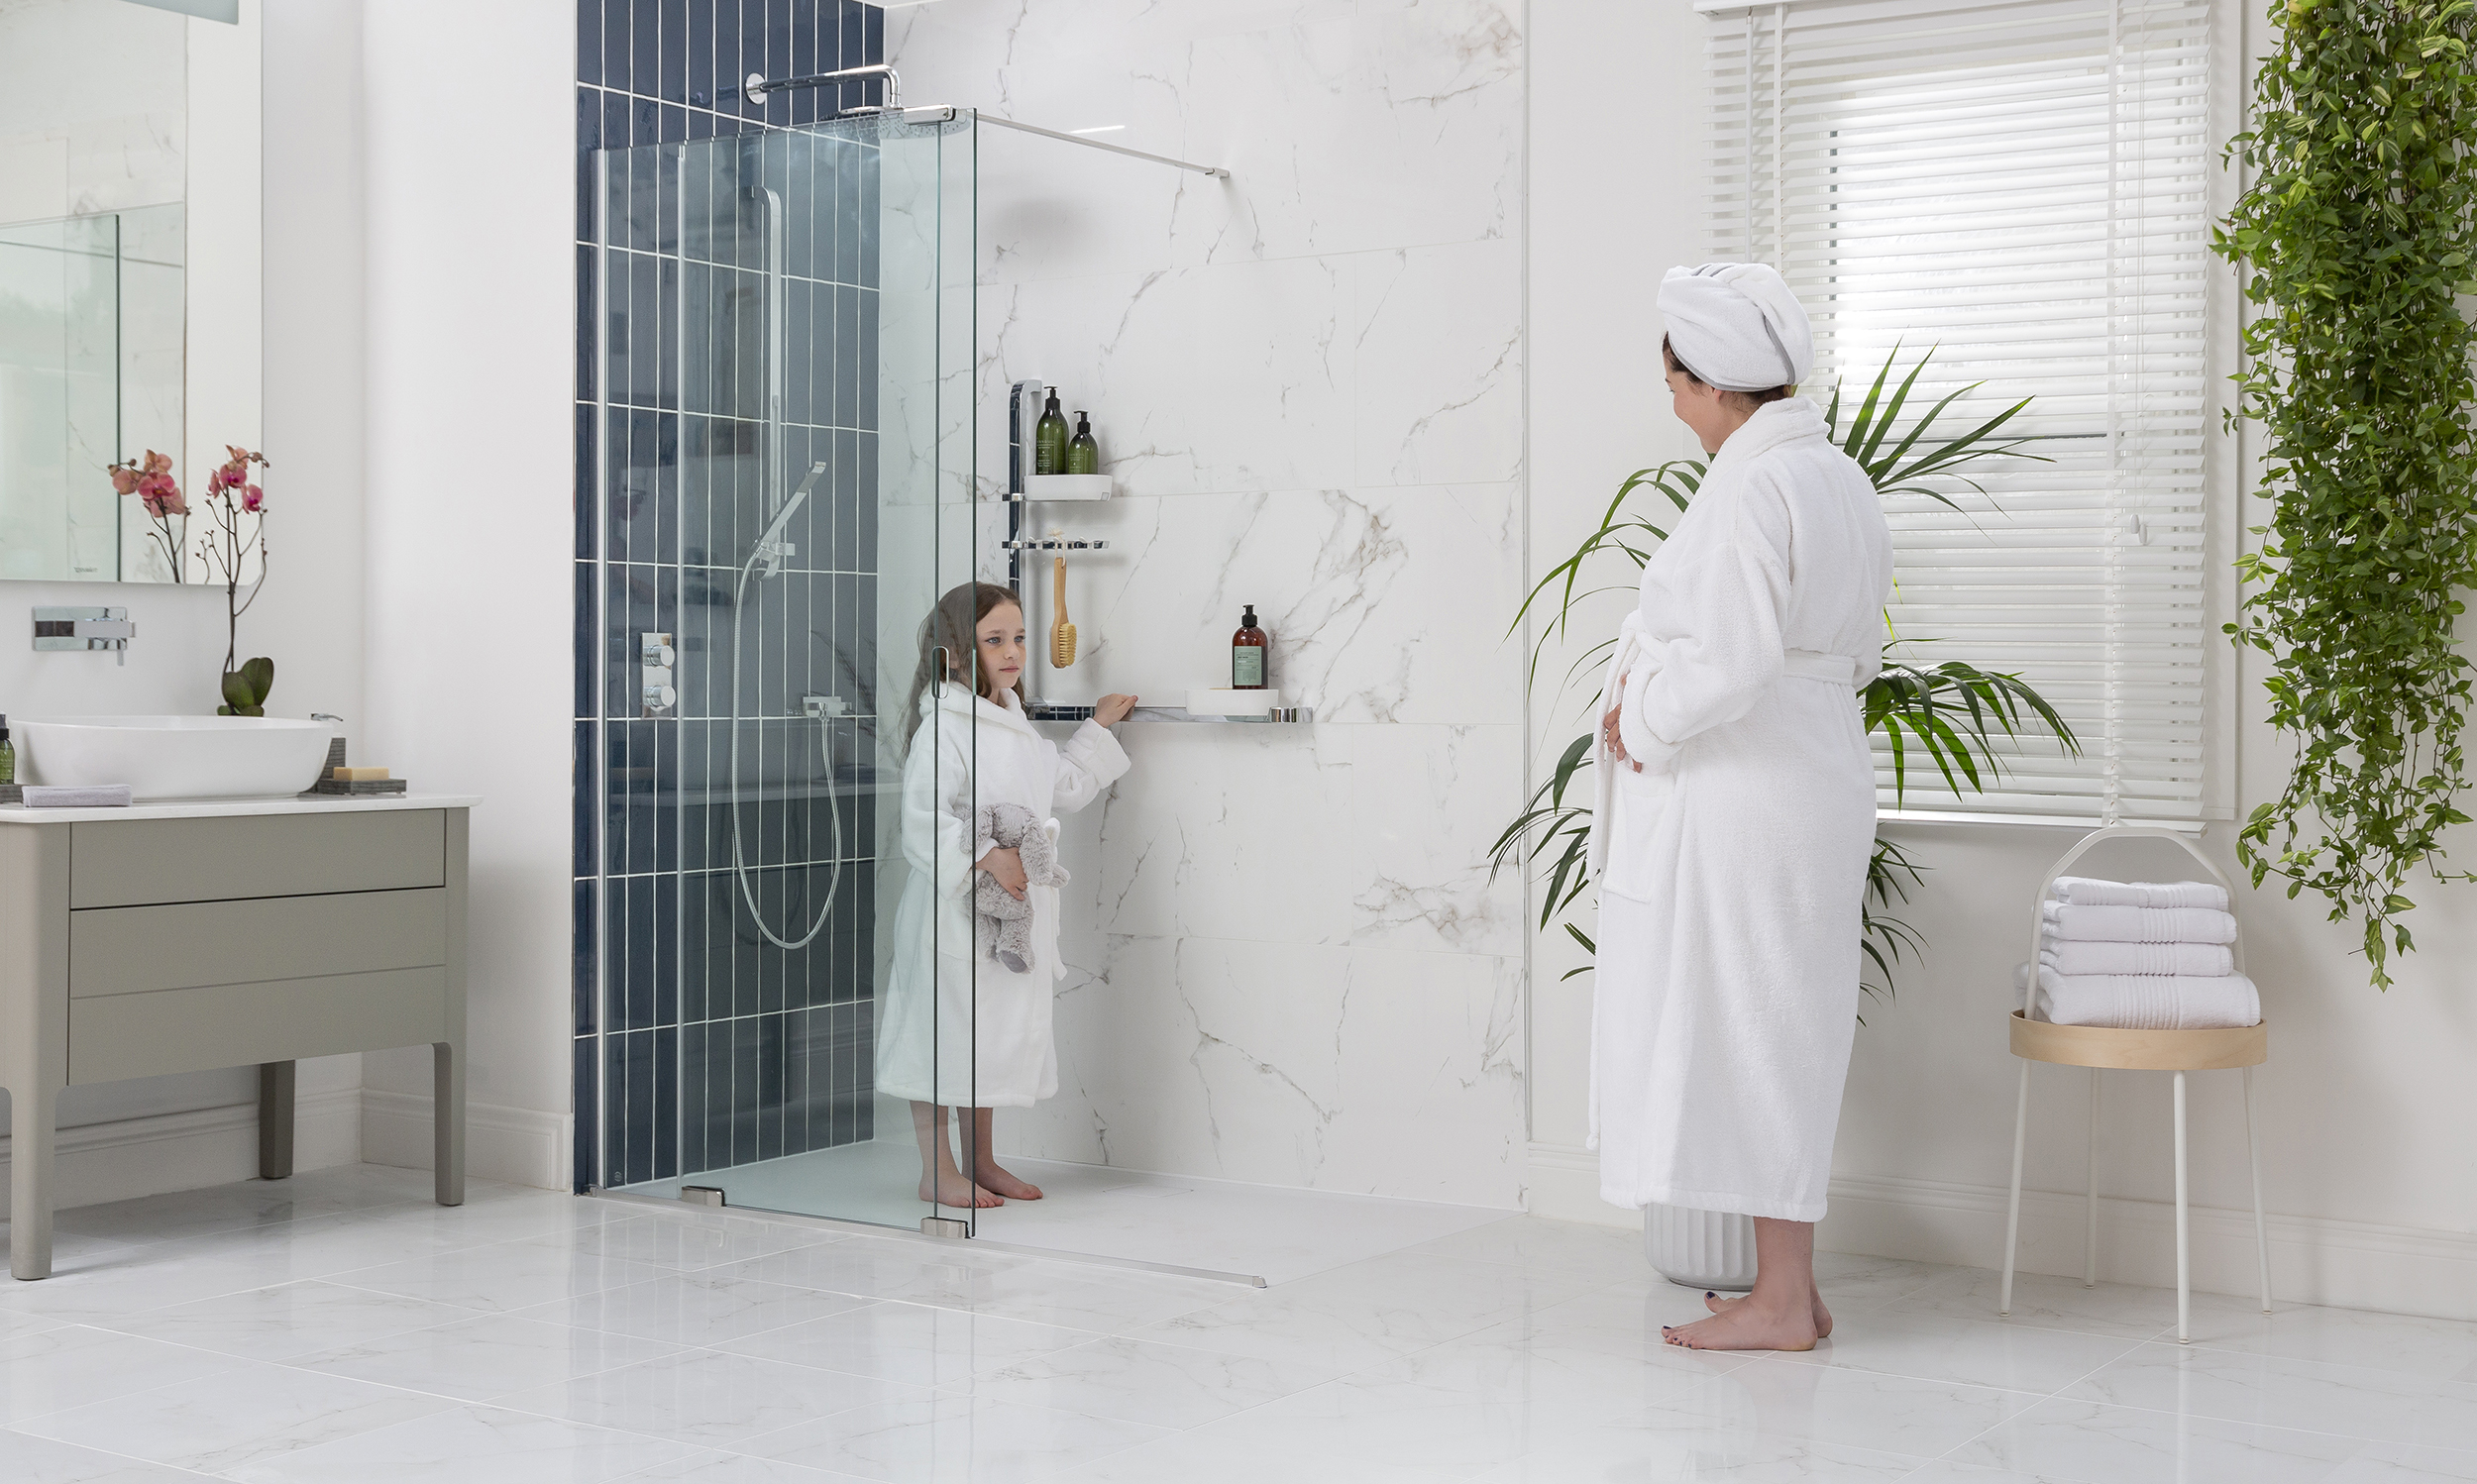 Photograph of a bathroom with a women and young child standing in their bathrobes. The child is standing in the walk in shower and beside her on the wall is a Merlyn revo shower rail